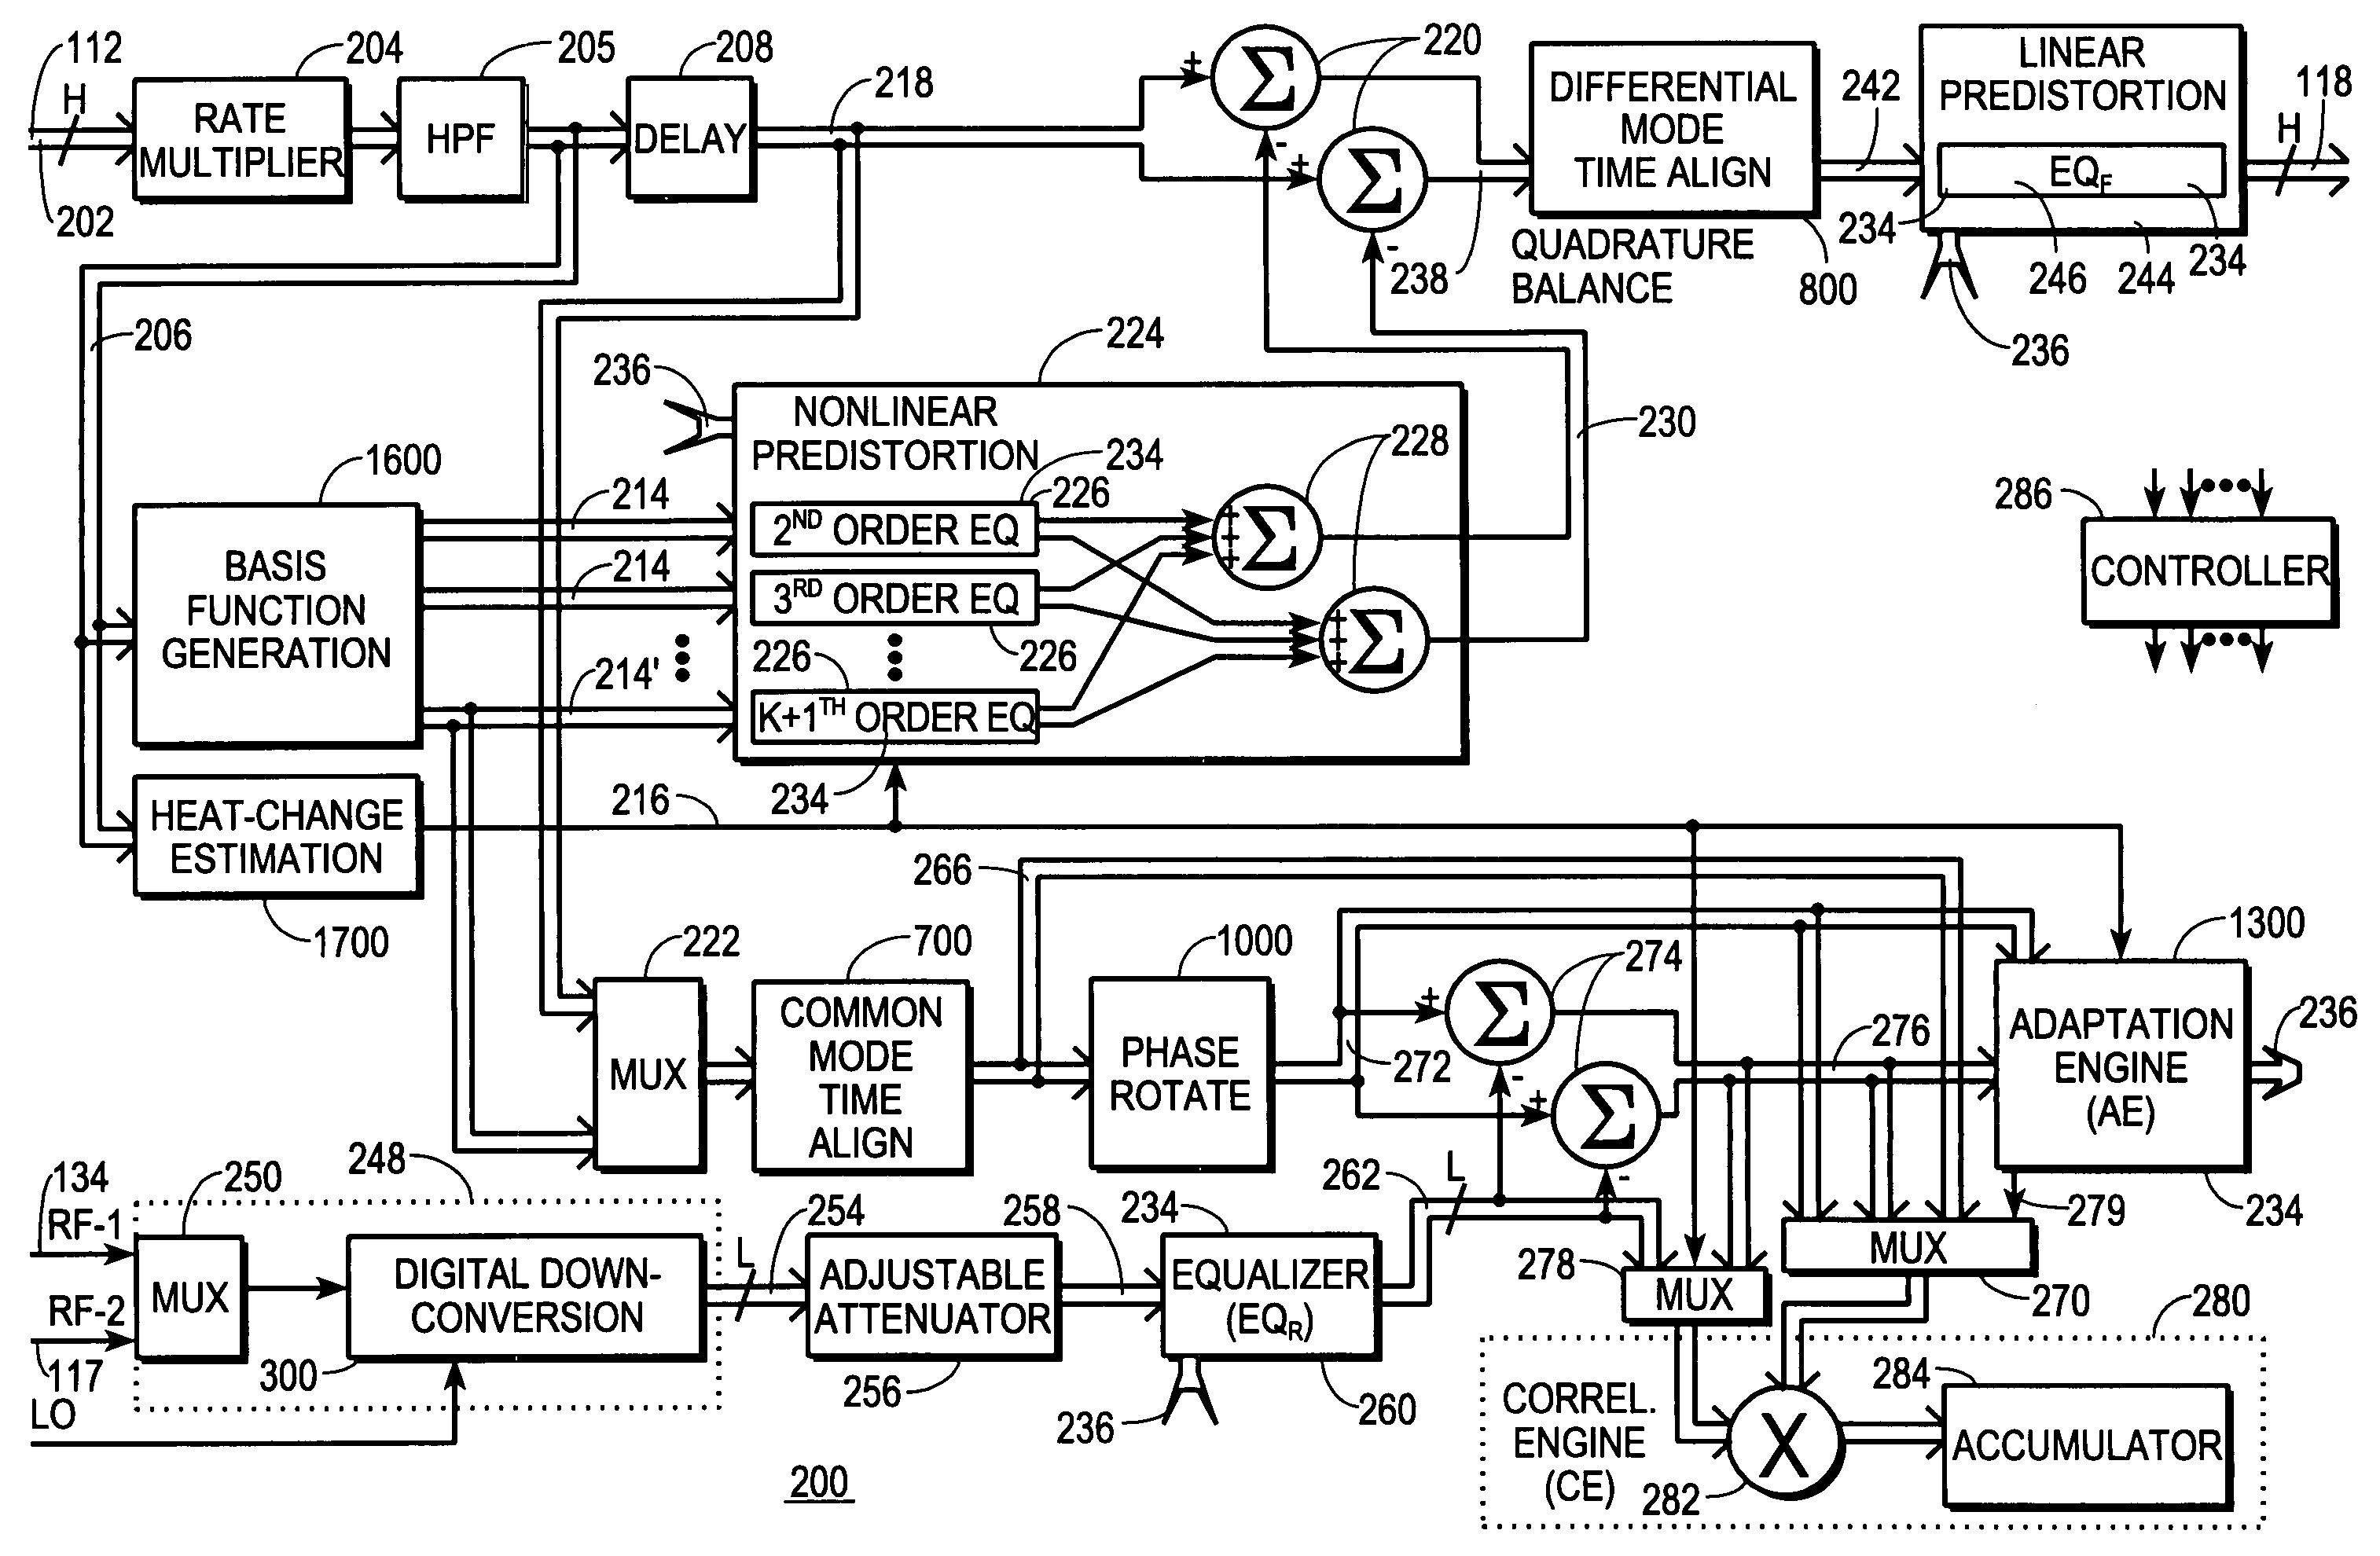 Predistortion circuit and method for compensating A/D and other distortion in a digital RF communications transmitter